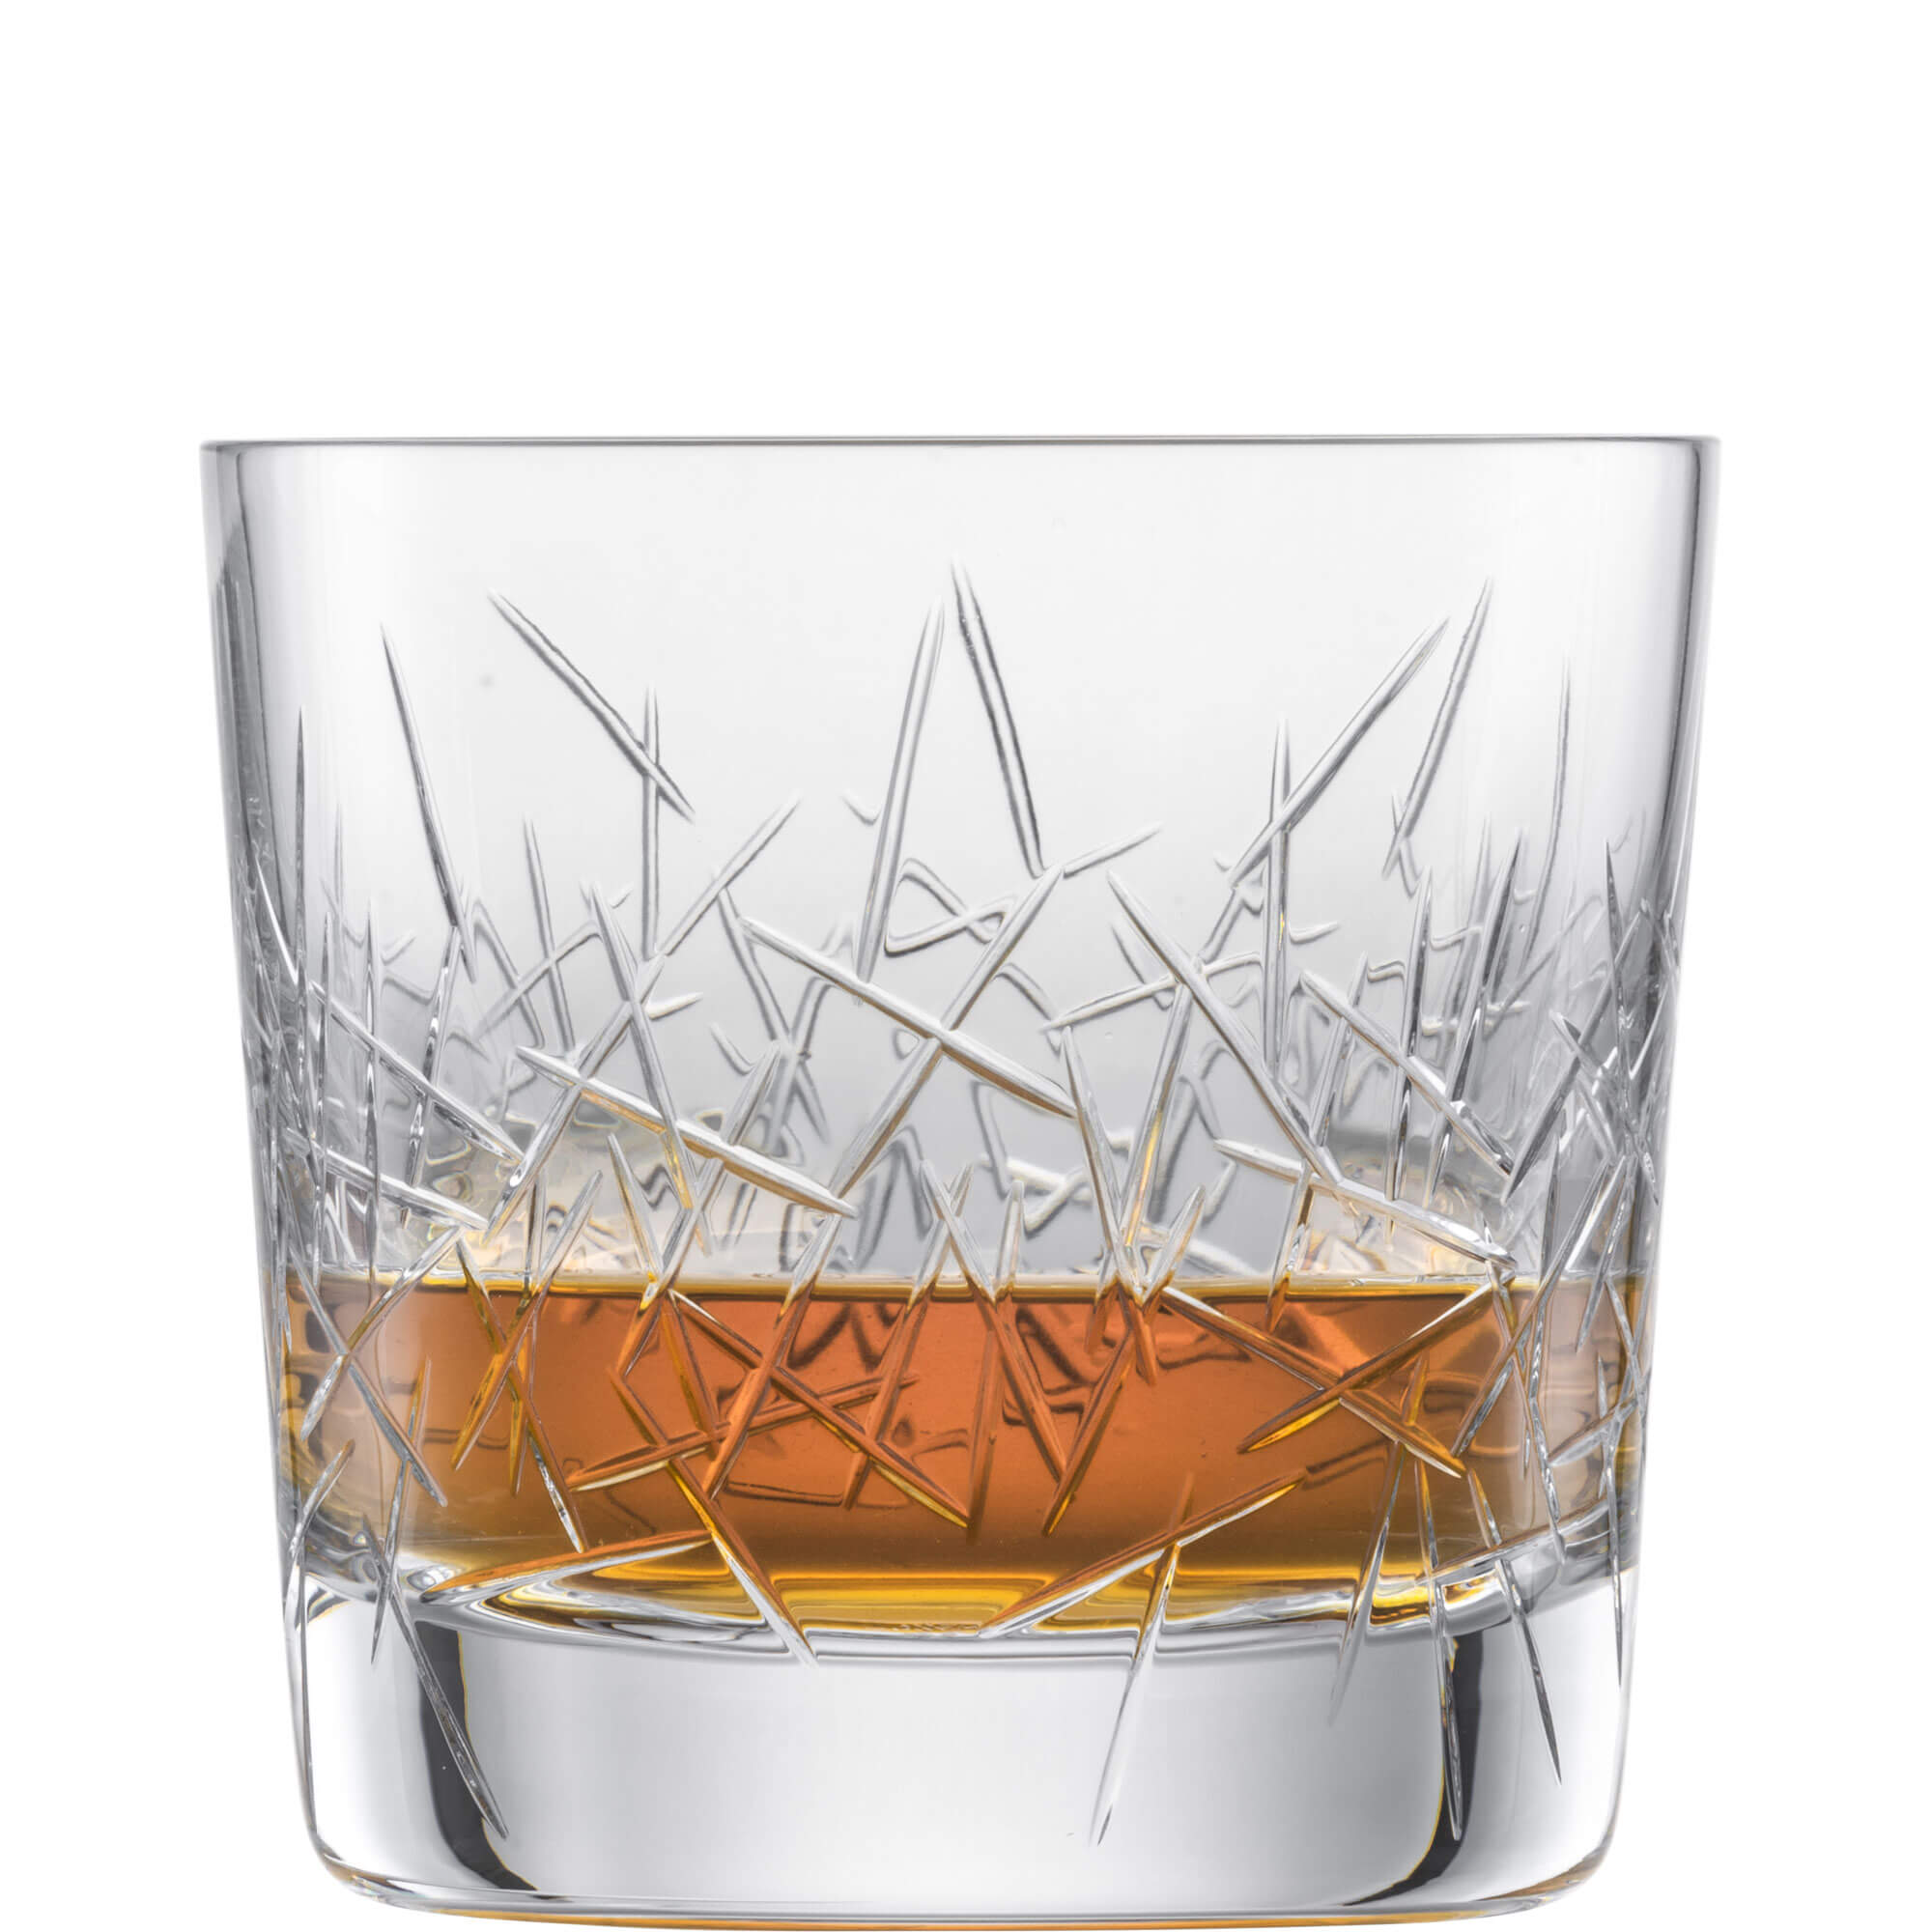 Whisky glass Hommage Glace, Zwiesel Glas - 399ml (1 pc.)